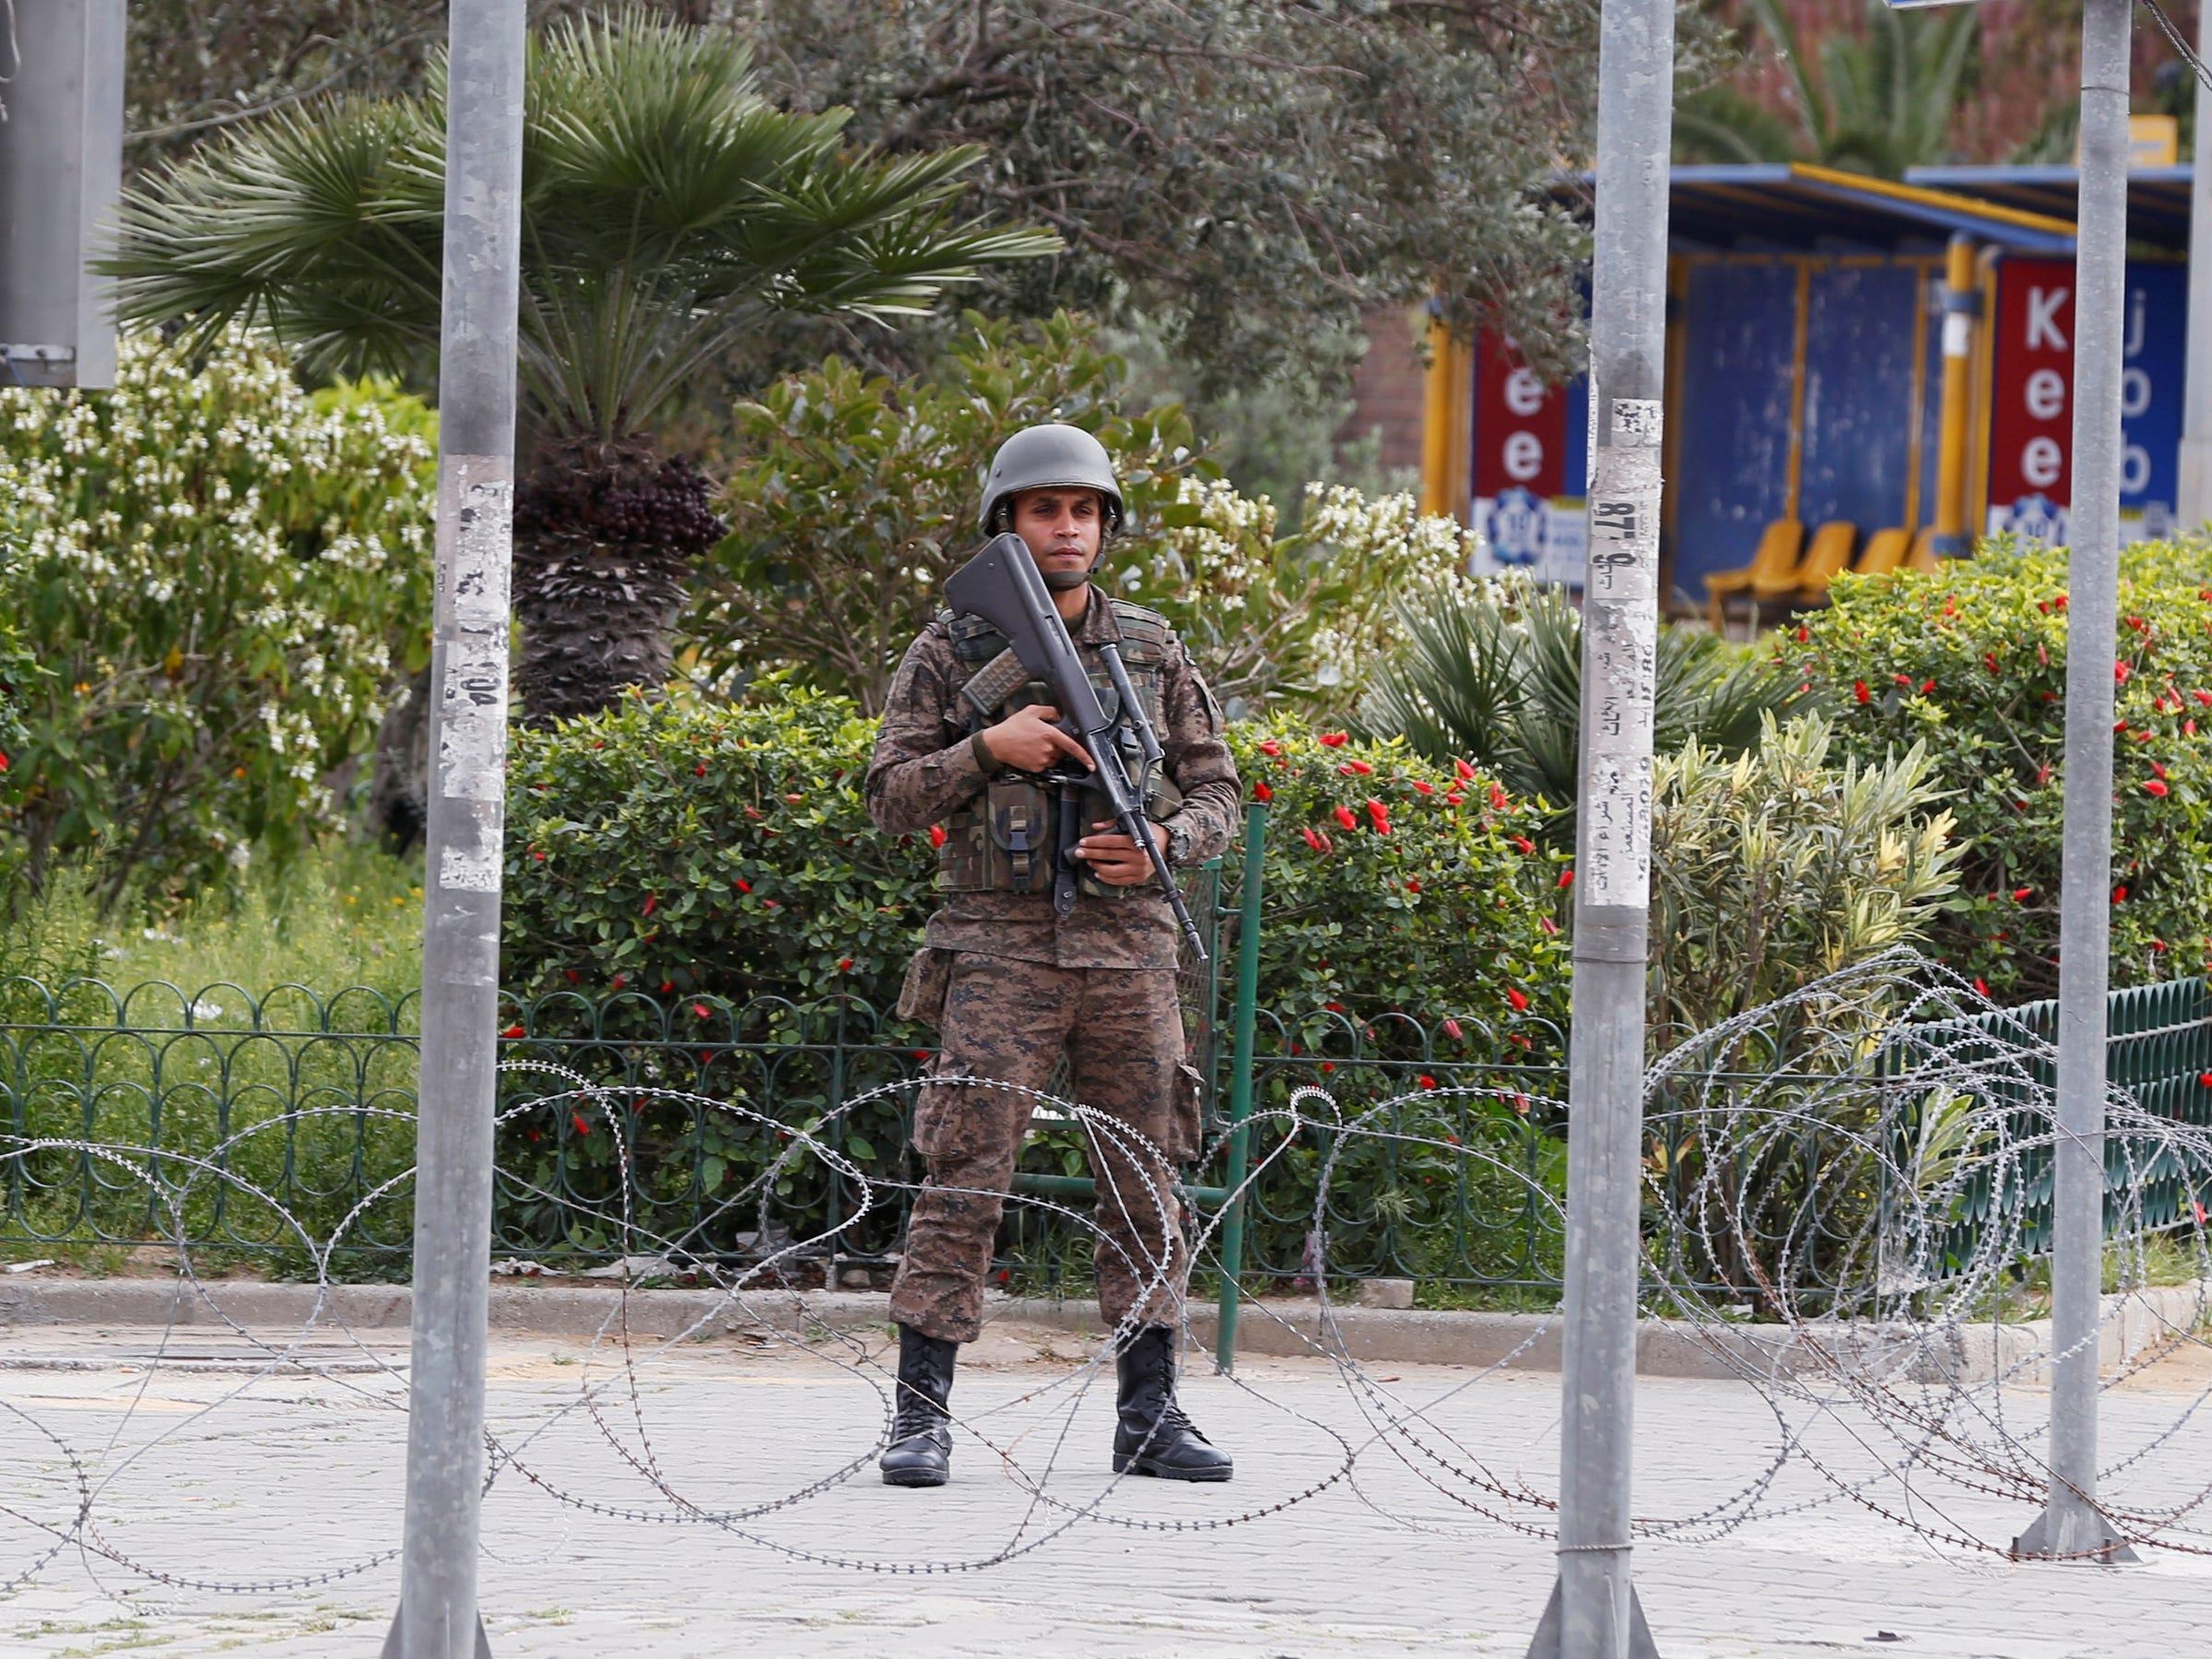 A soldier stands in downtown Tunis on March 24, after Tunisia's president ordered the army to patrol the streets and enforce a public curfew from 6 pm to 6 am to stop the spread of coronavirus.